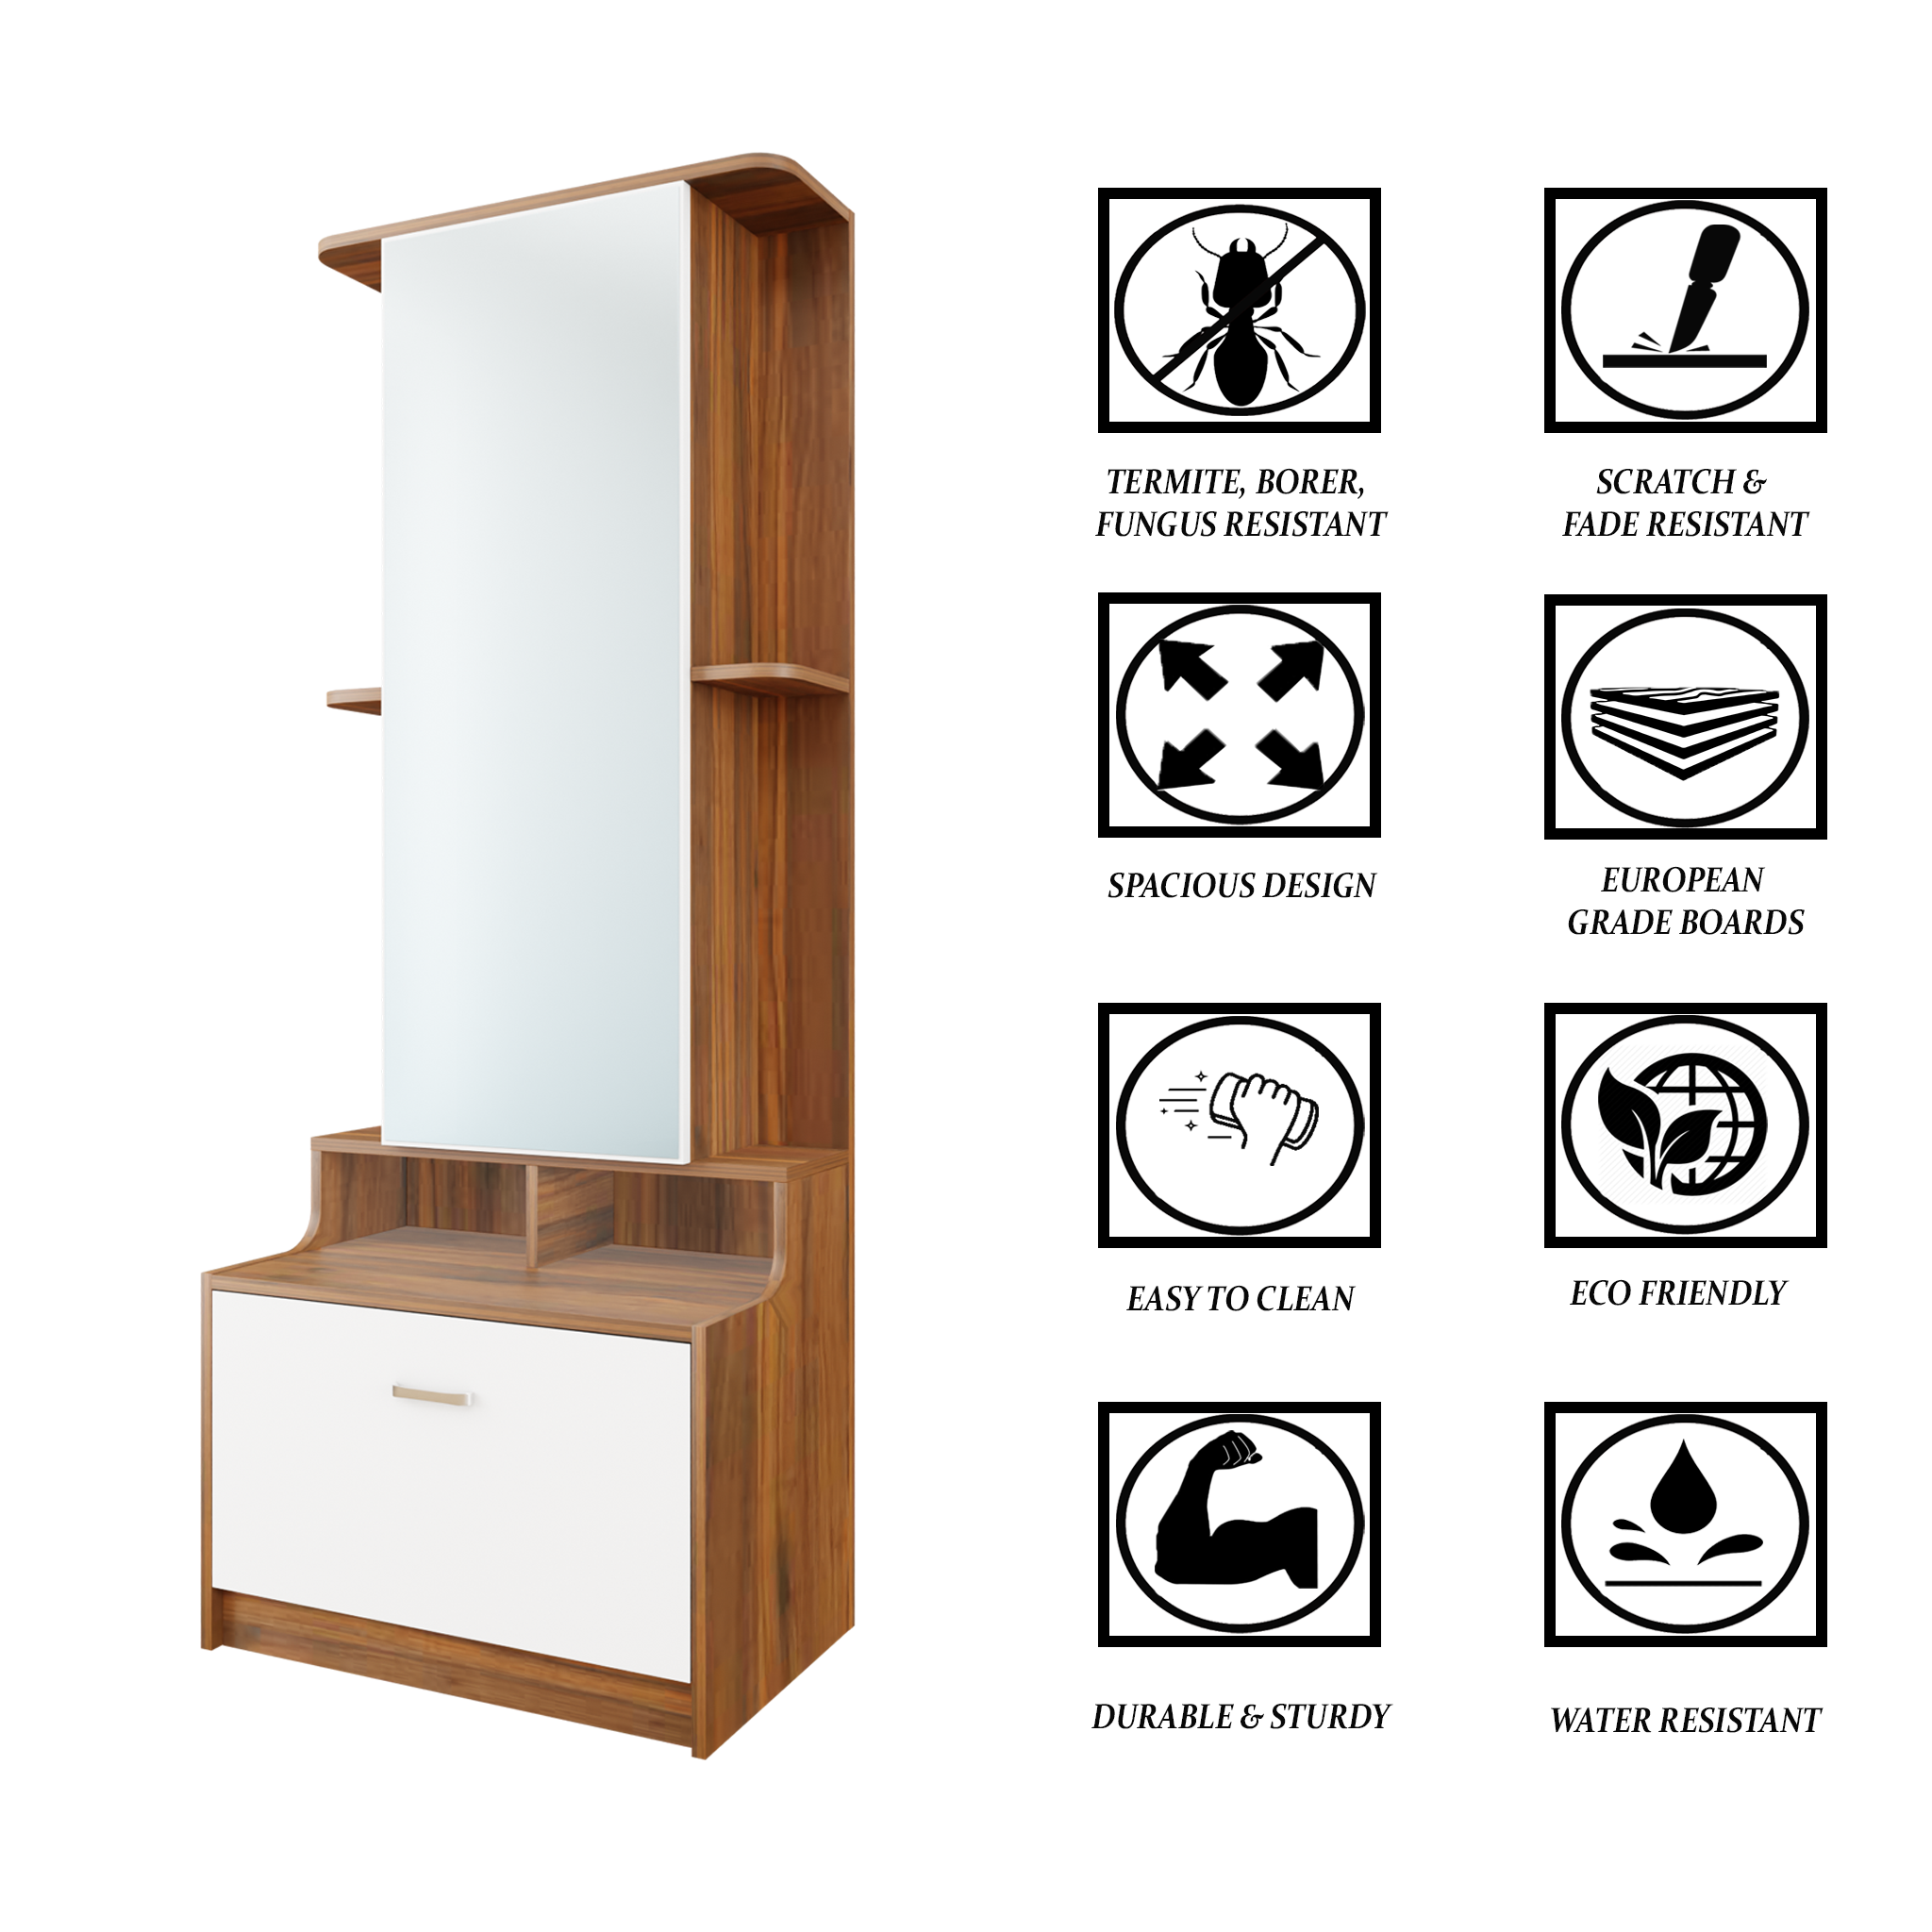 This Ikea hack turns a £40 drawer into an actual dressing table